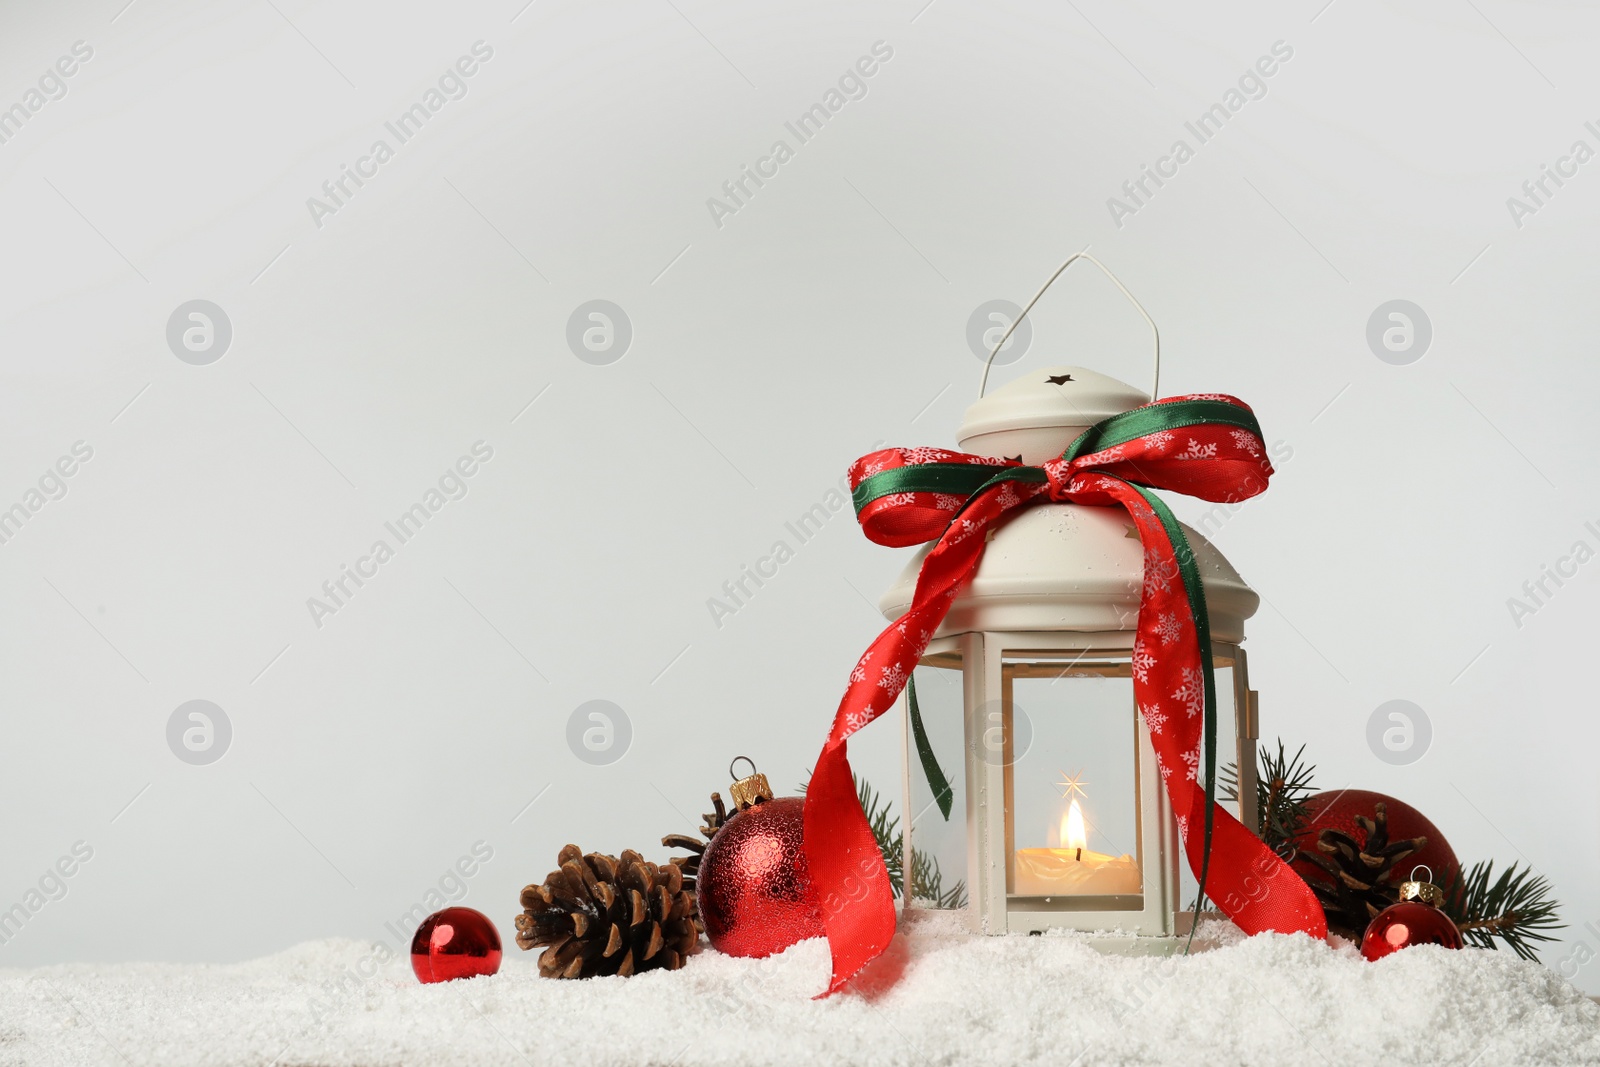 Photo of Decorative lantern and Christmas decor on snow against light grey background. Space for text